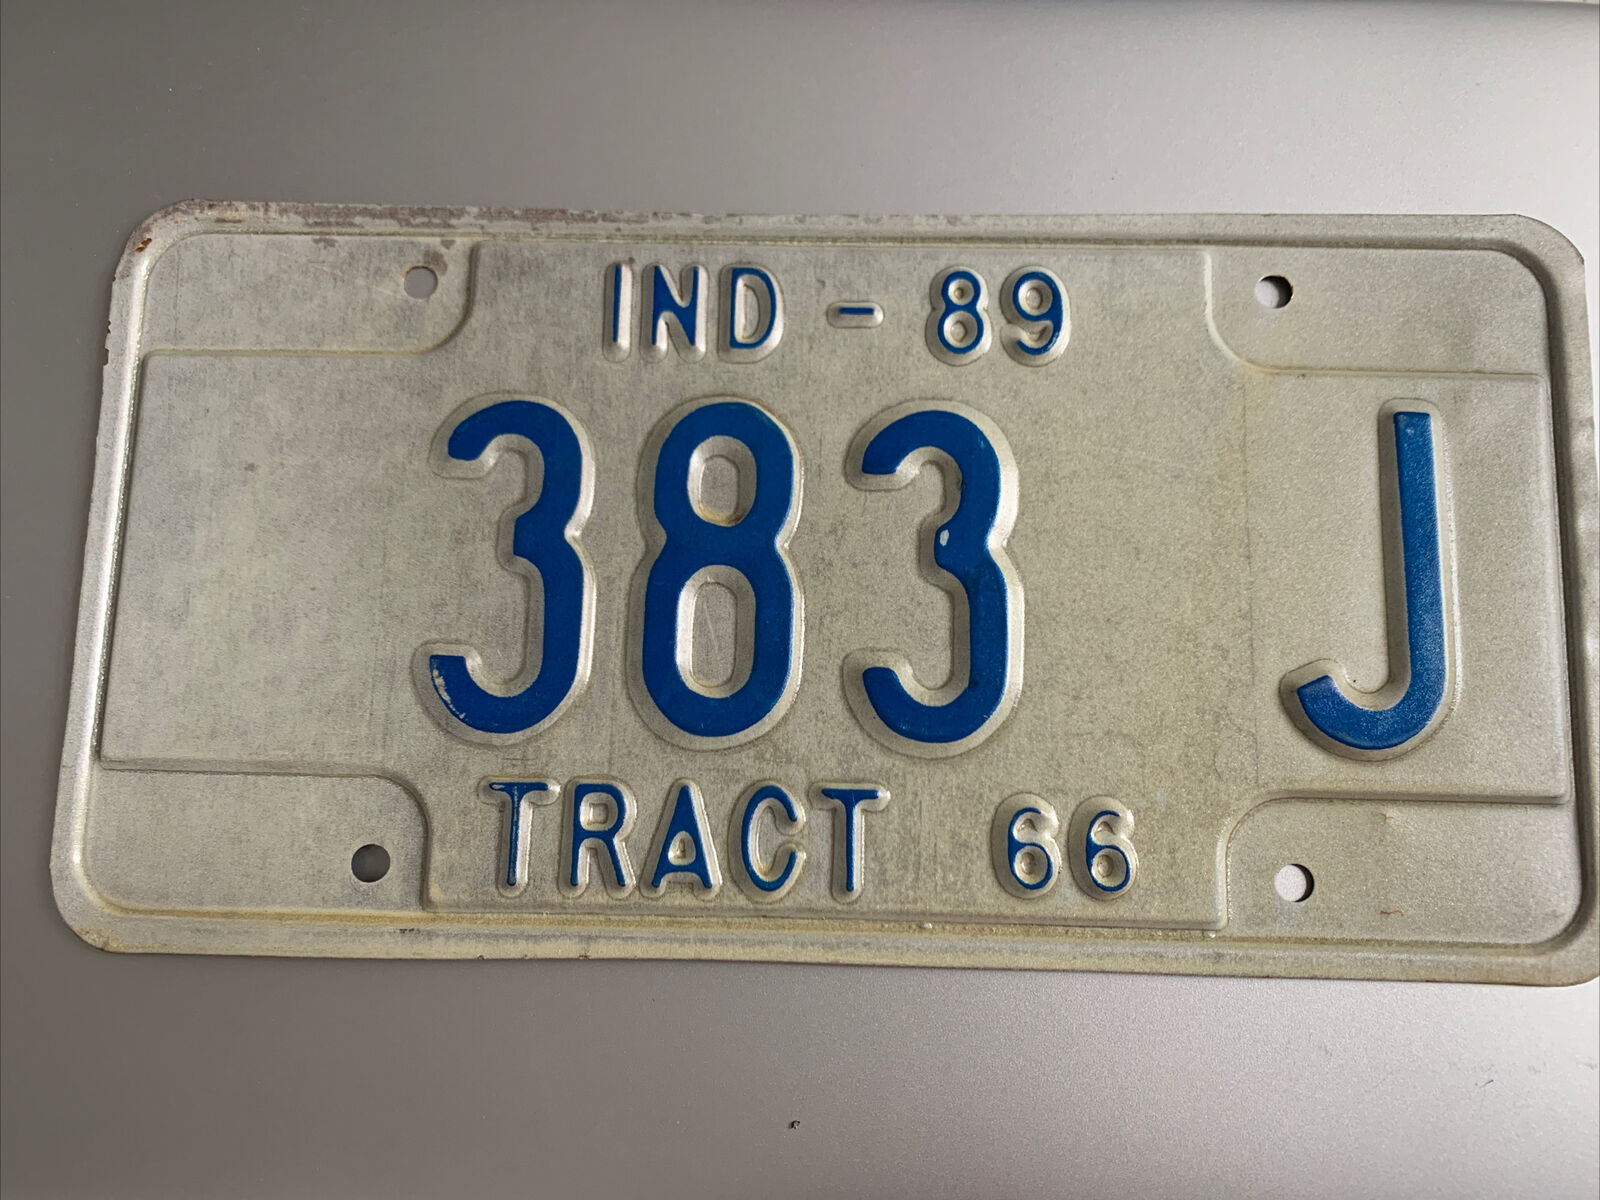 Indiana License Plate. Vintage 1989 Tractor # 383 J. Tract 66